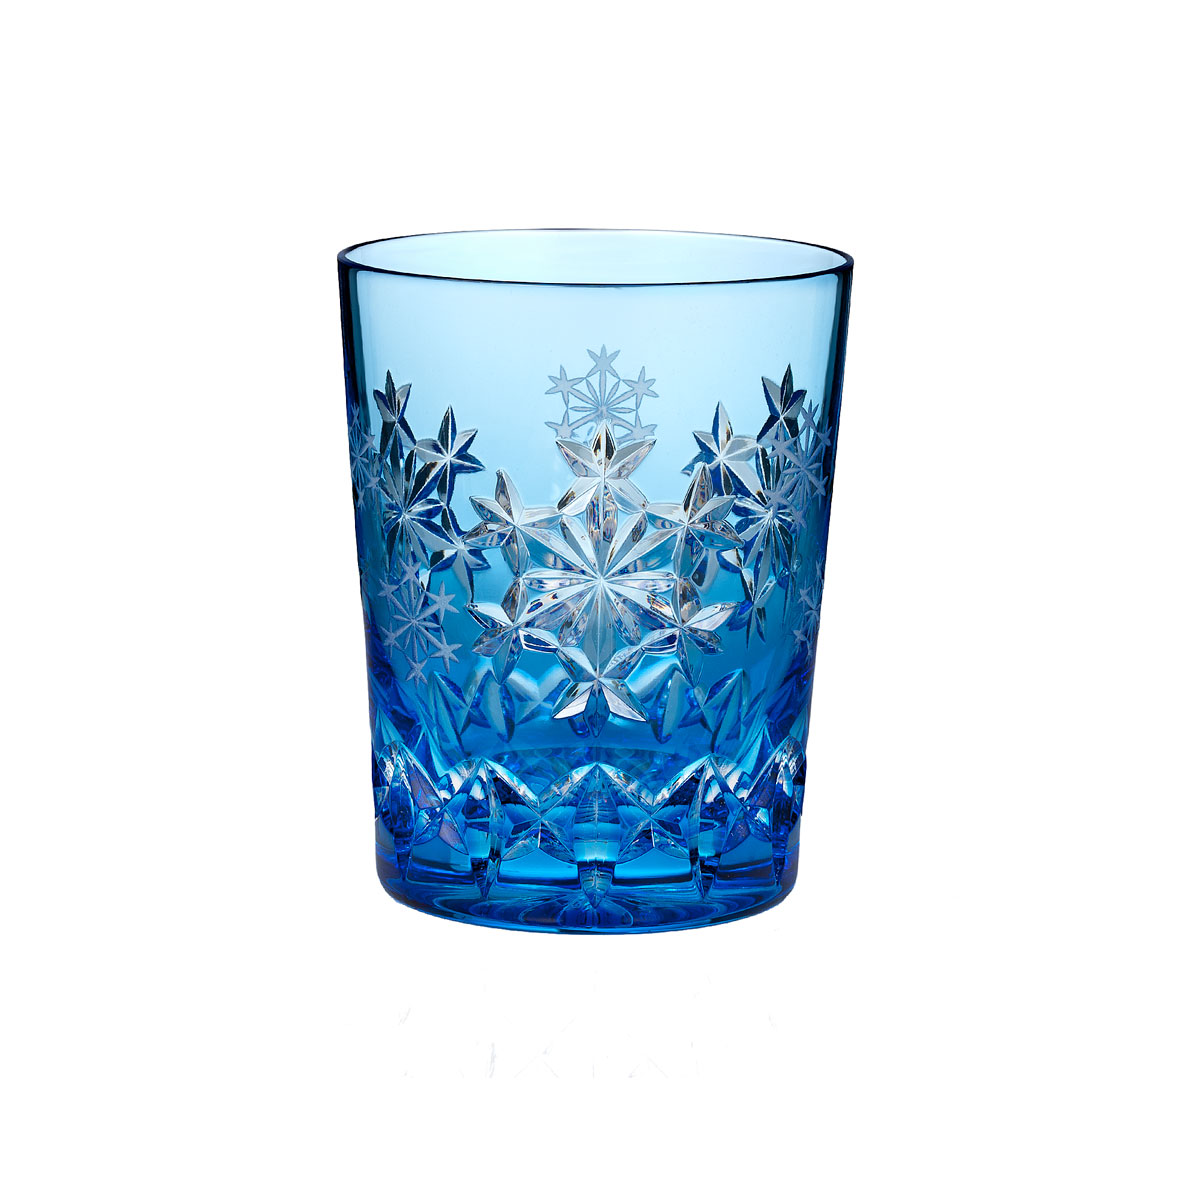 Waterford Snowflake Wishes Goodwill Light Blue DOF, Single